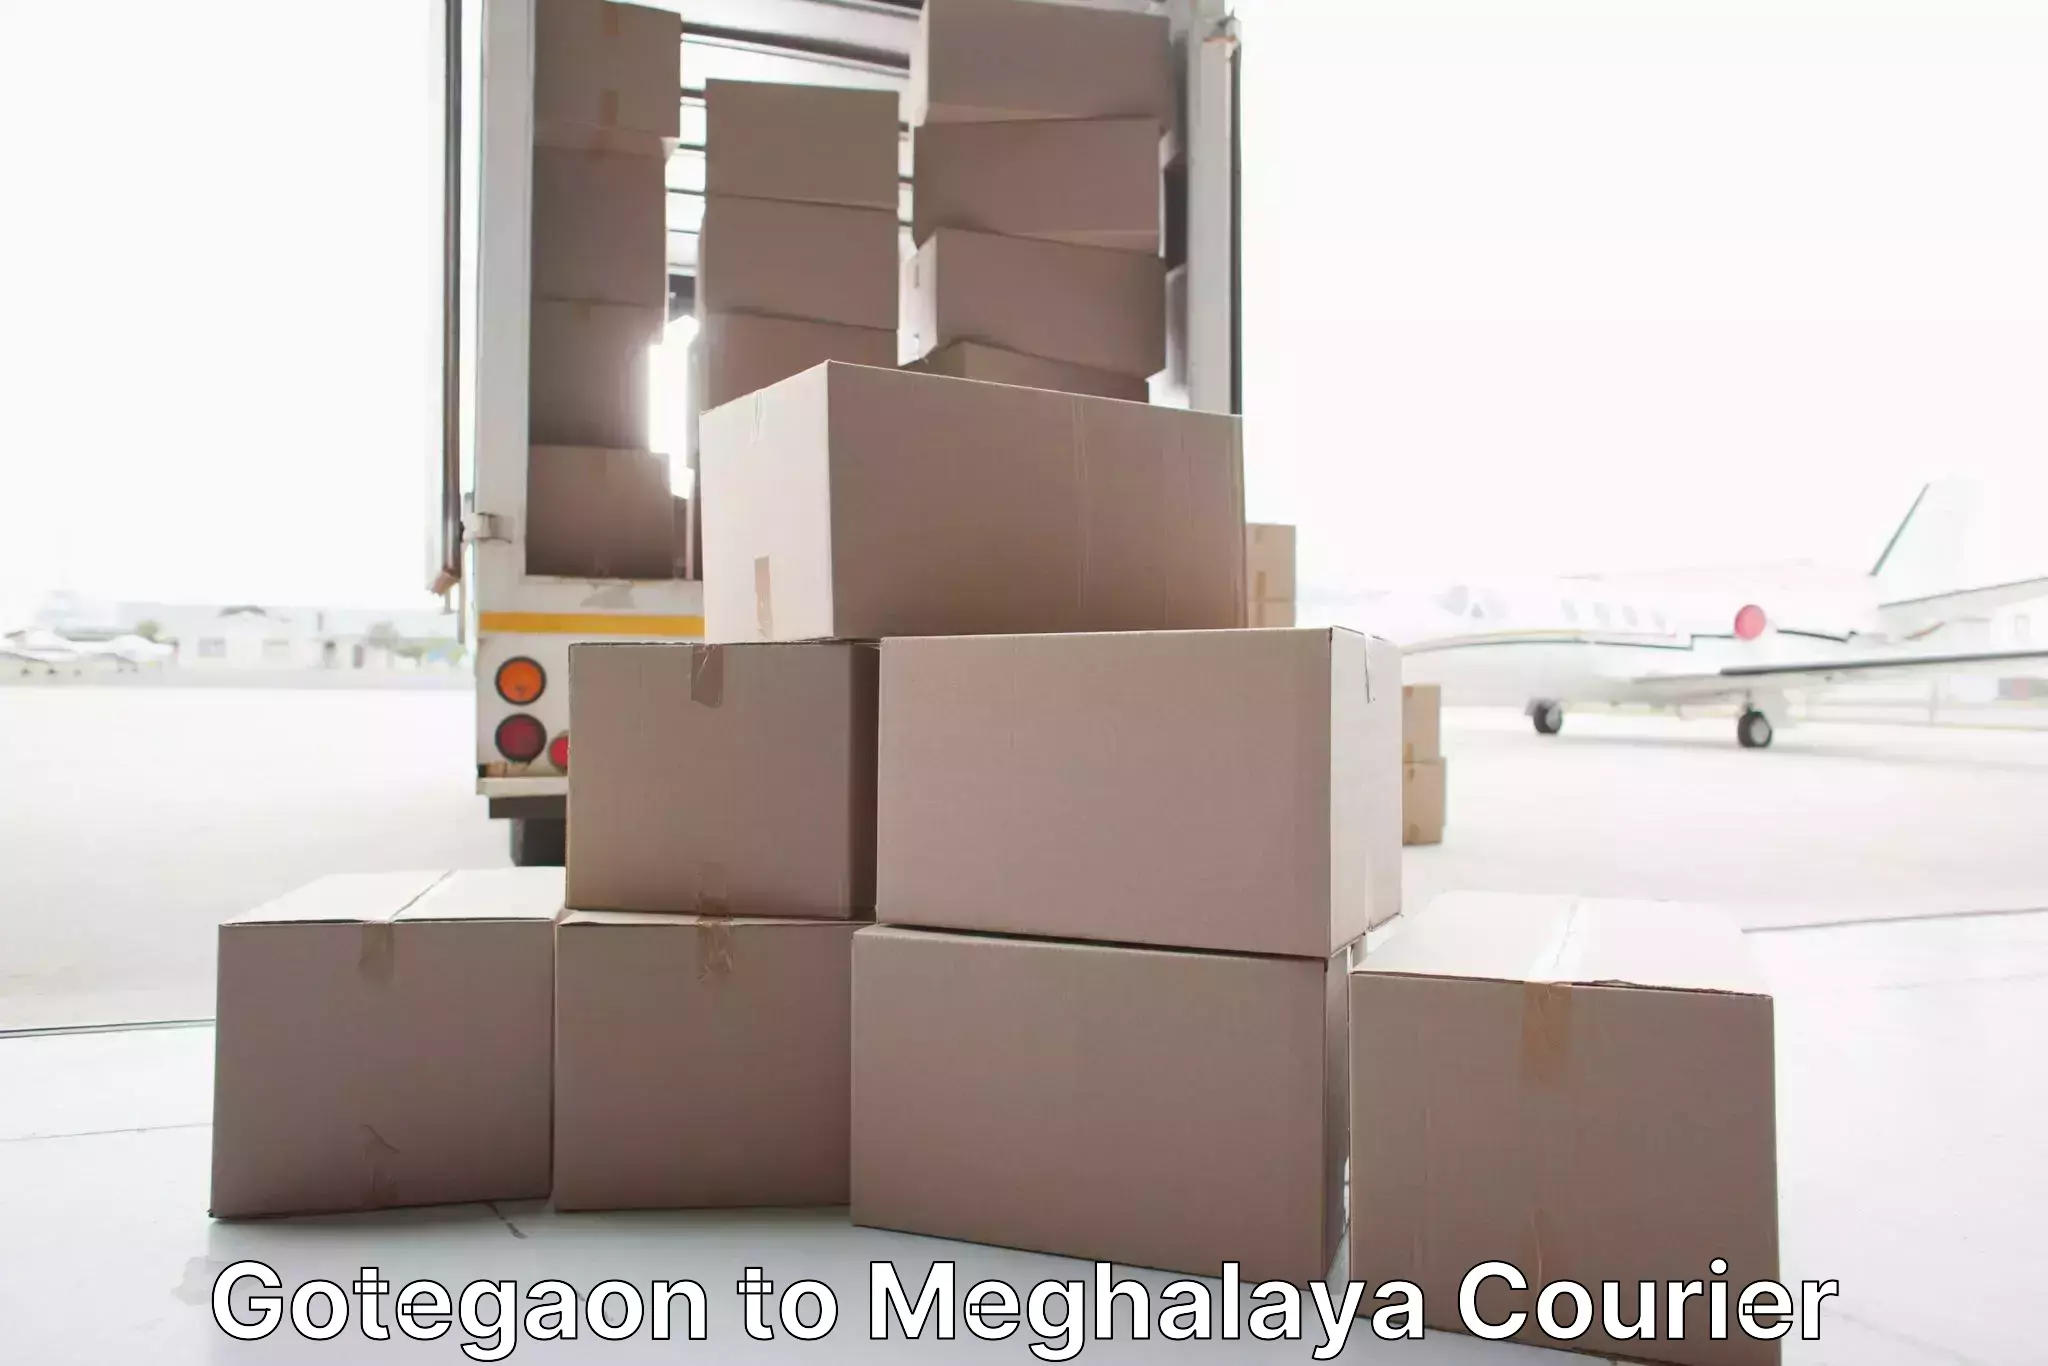 Moving and packing experts Gotegaon to Meghalaya